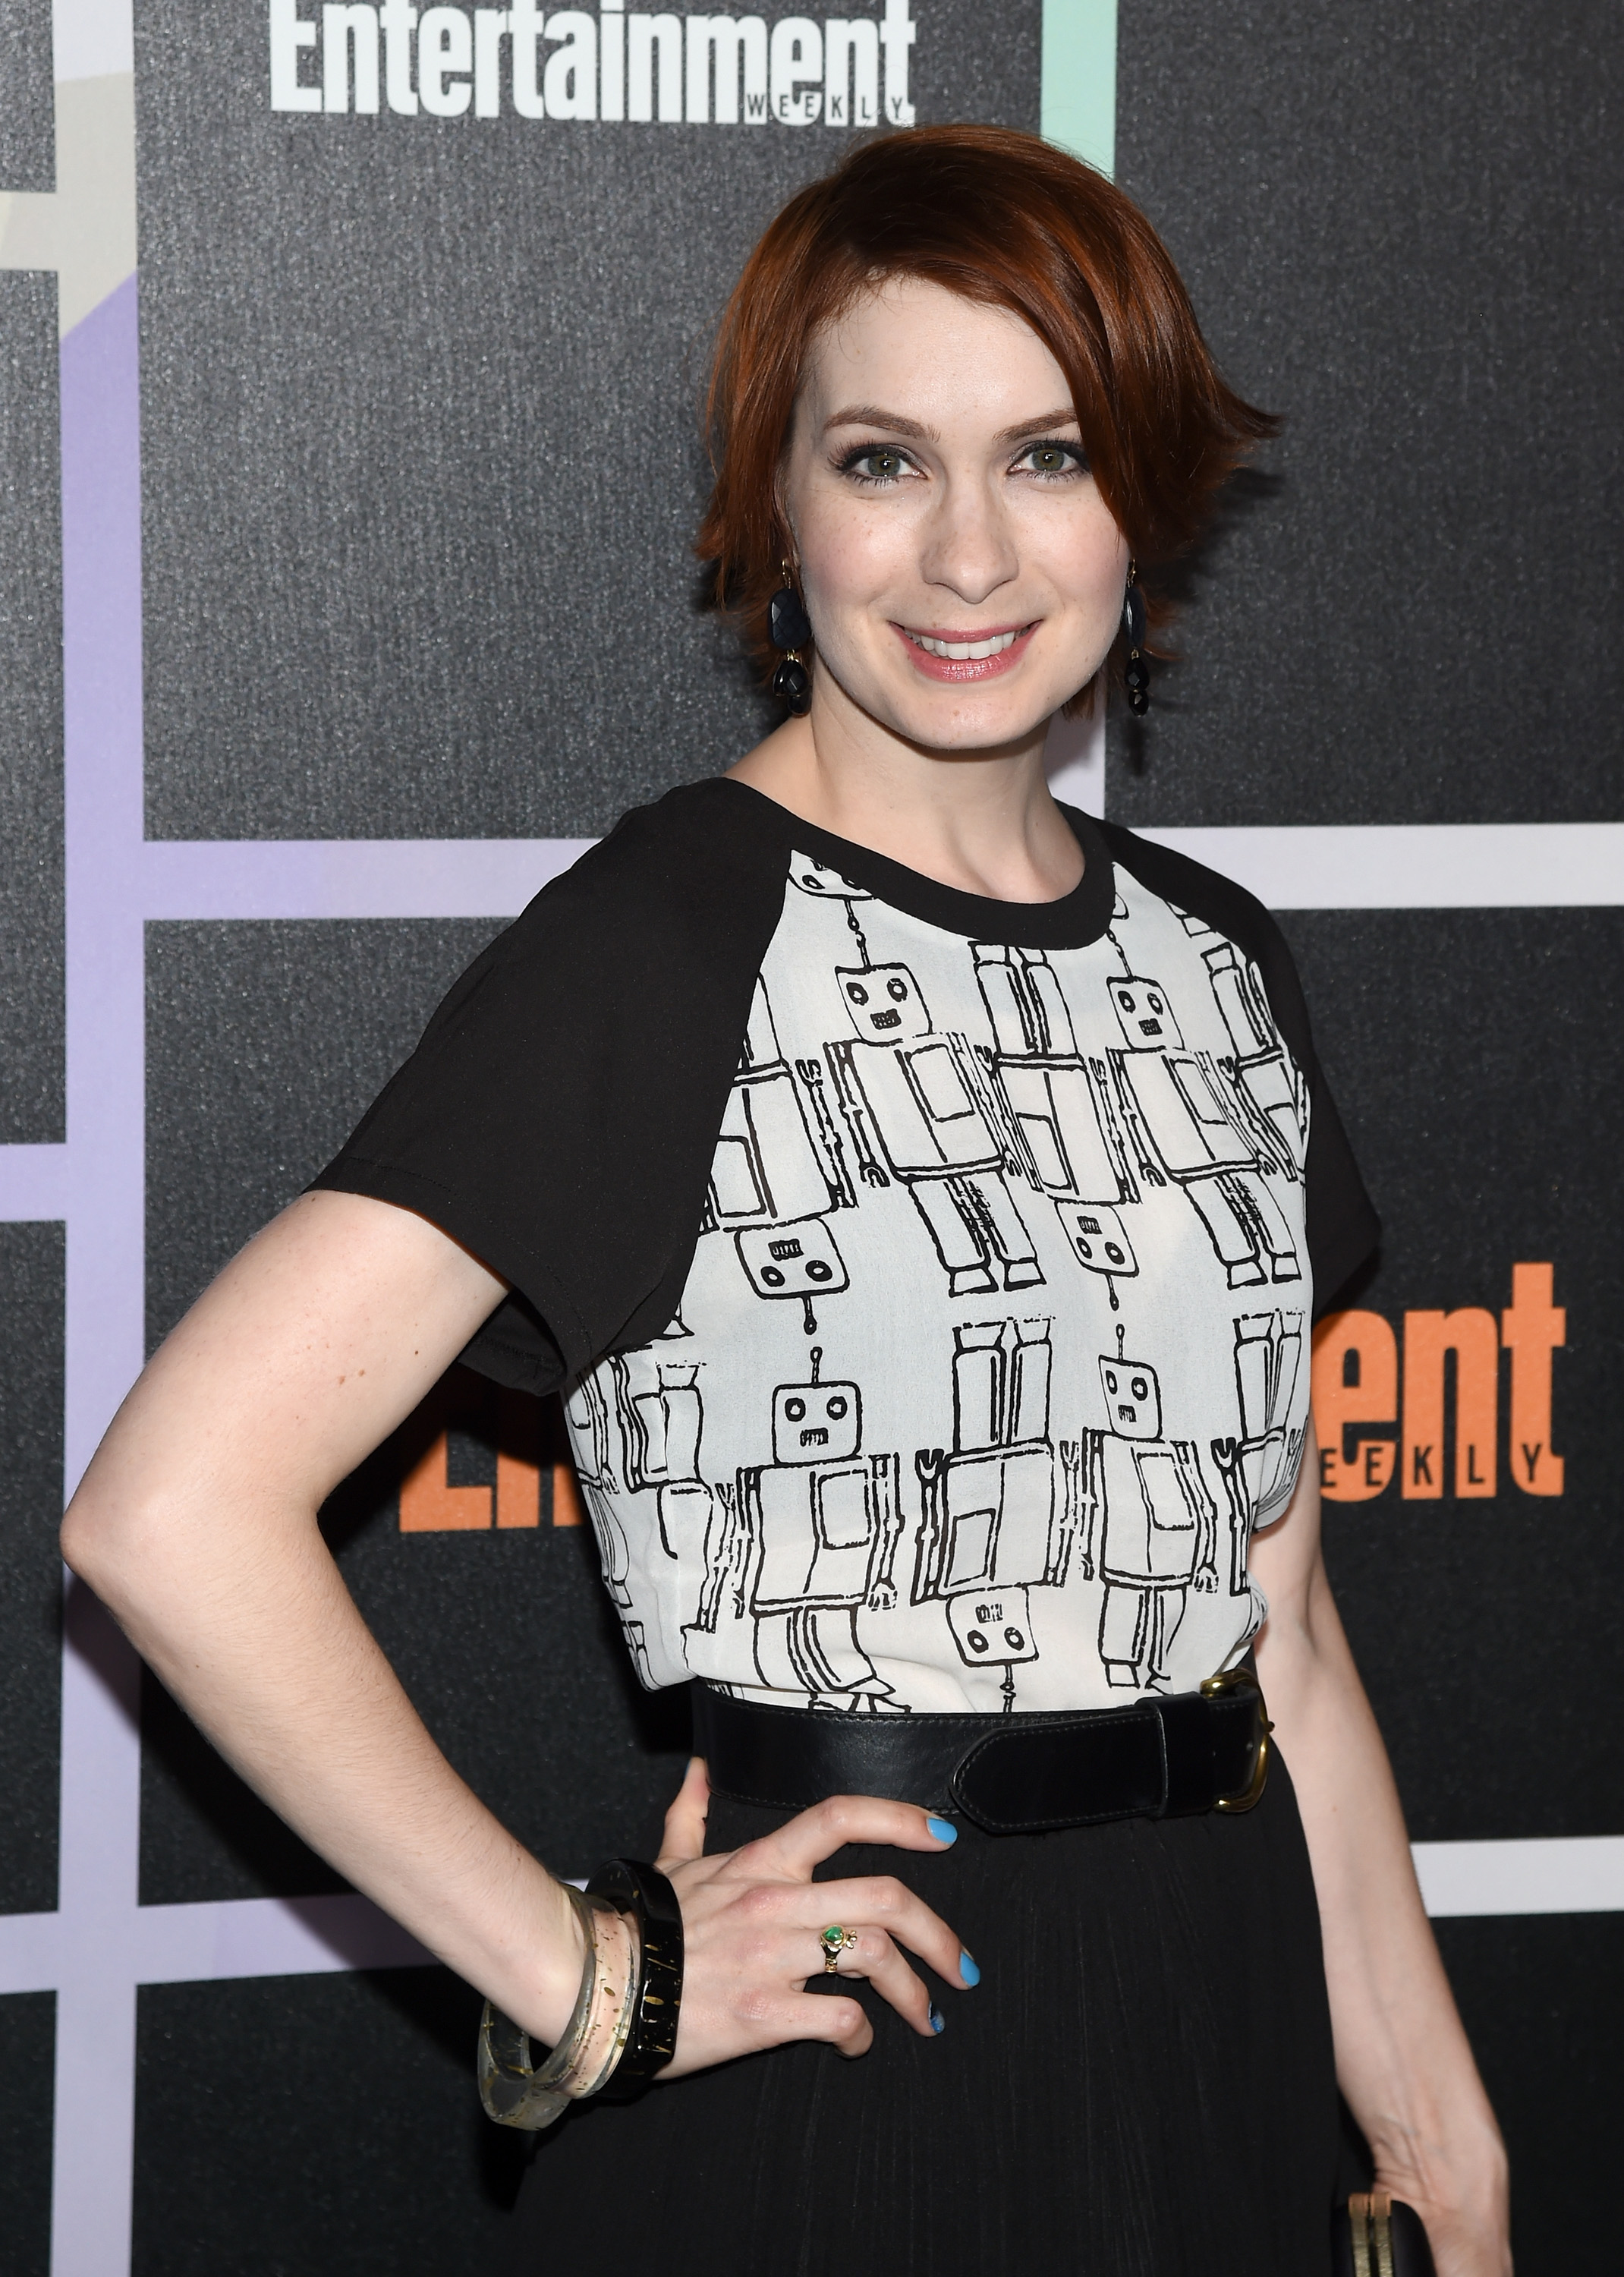 Leaked felicia day “Queen of